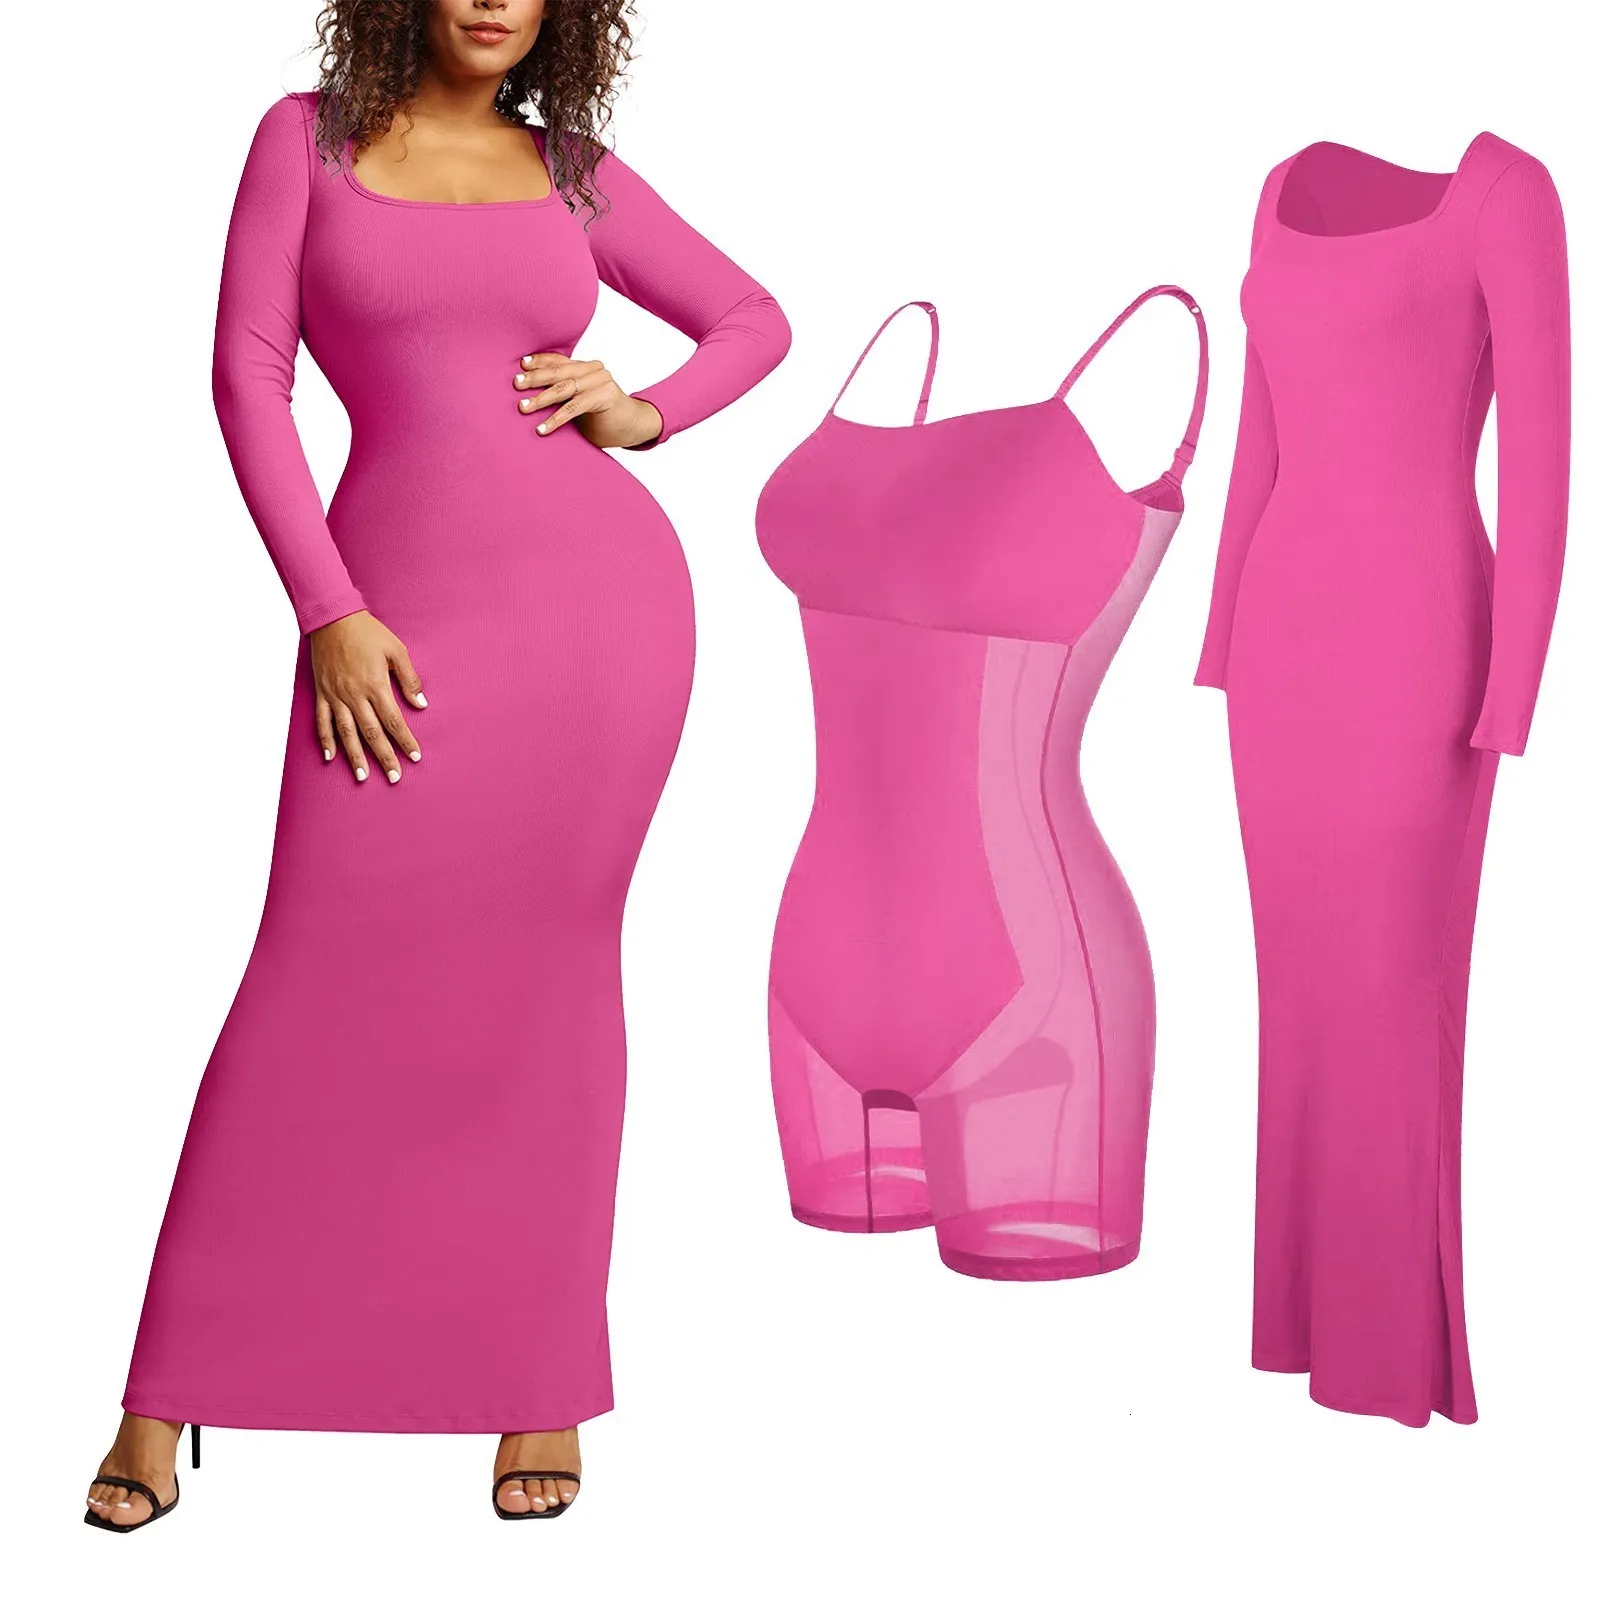 Womens Solid Color Body Shaping Maxi Dress With Built In Shaper